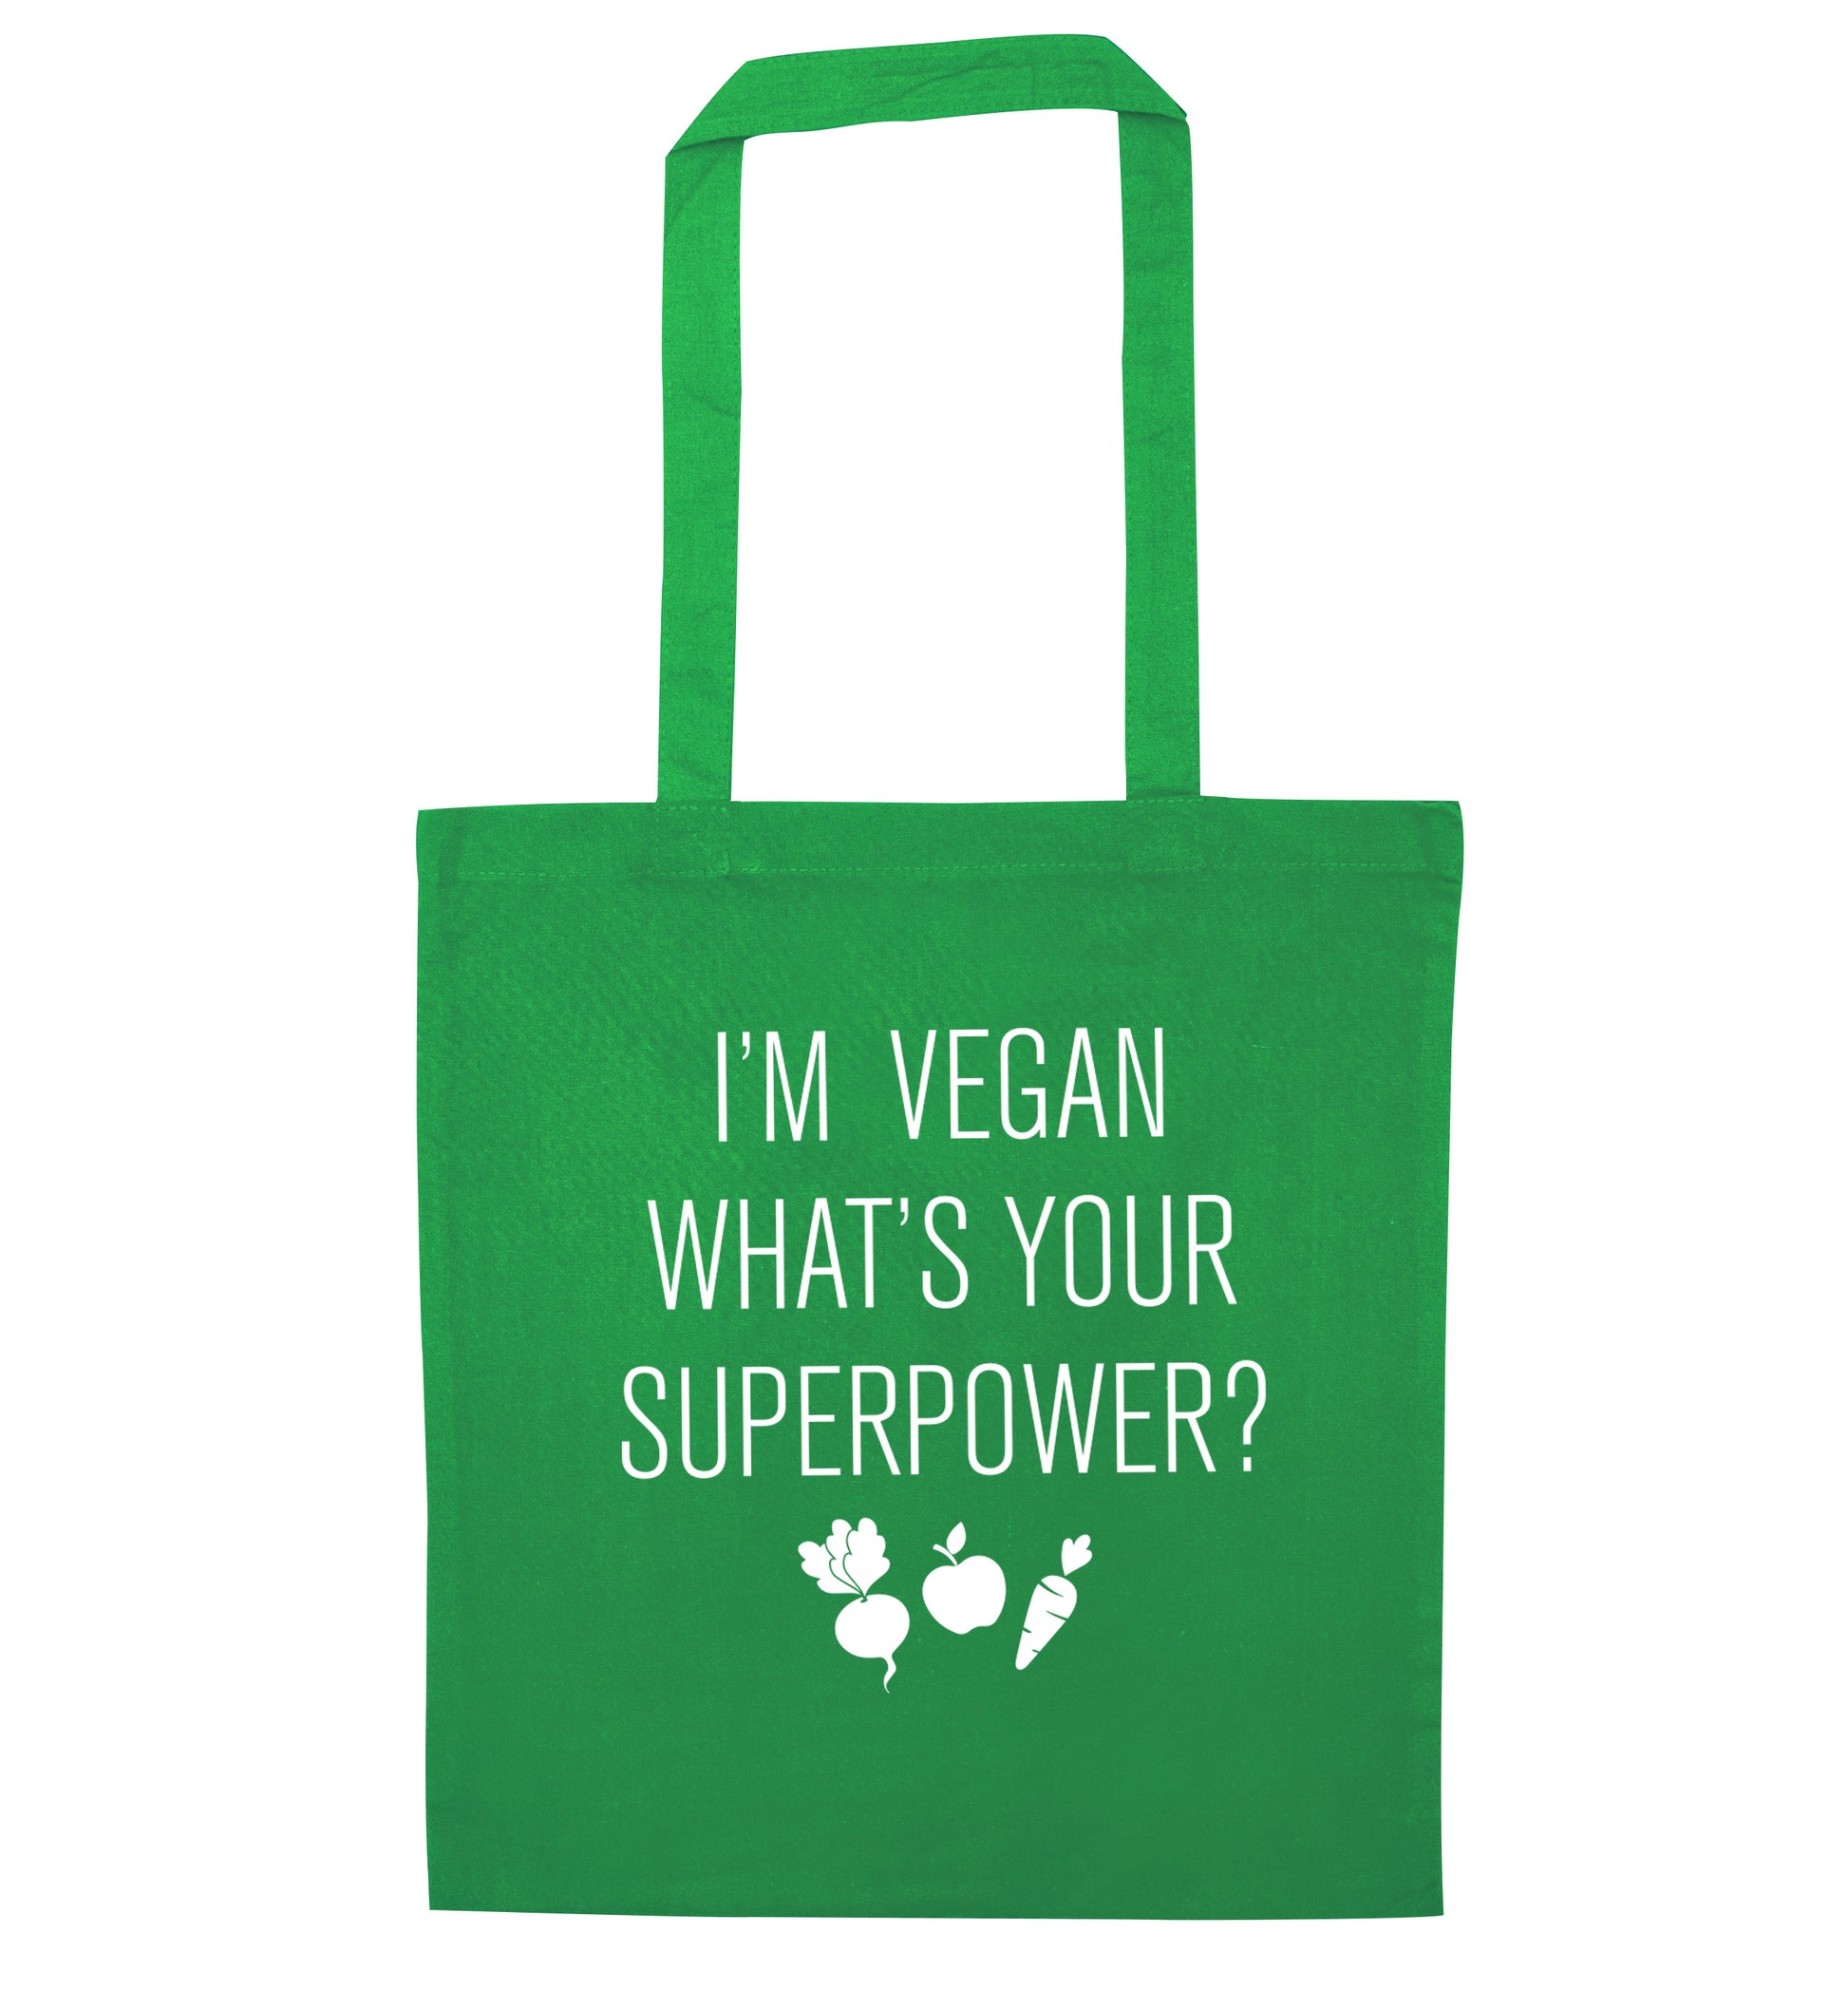 I'm Vegan What's Your Superpower? green tote bag